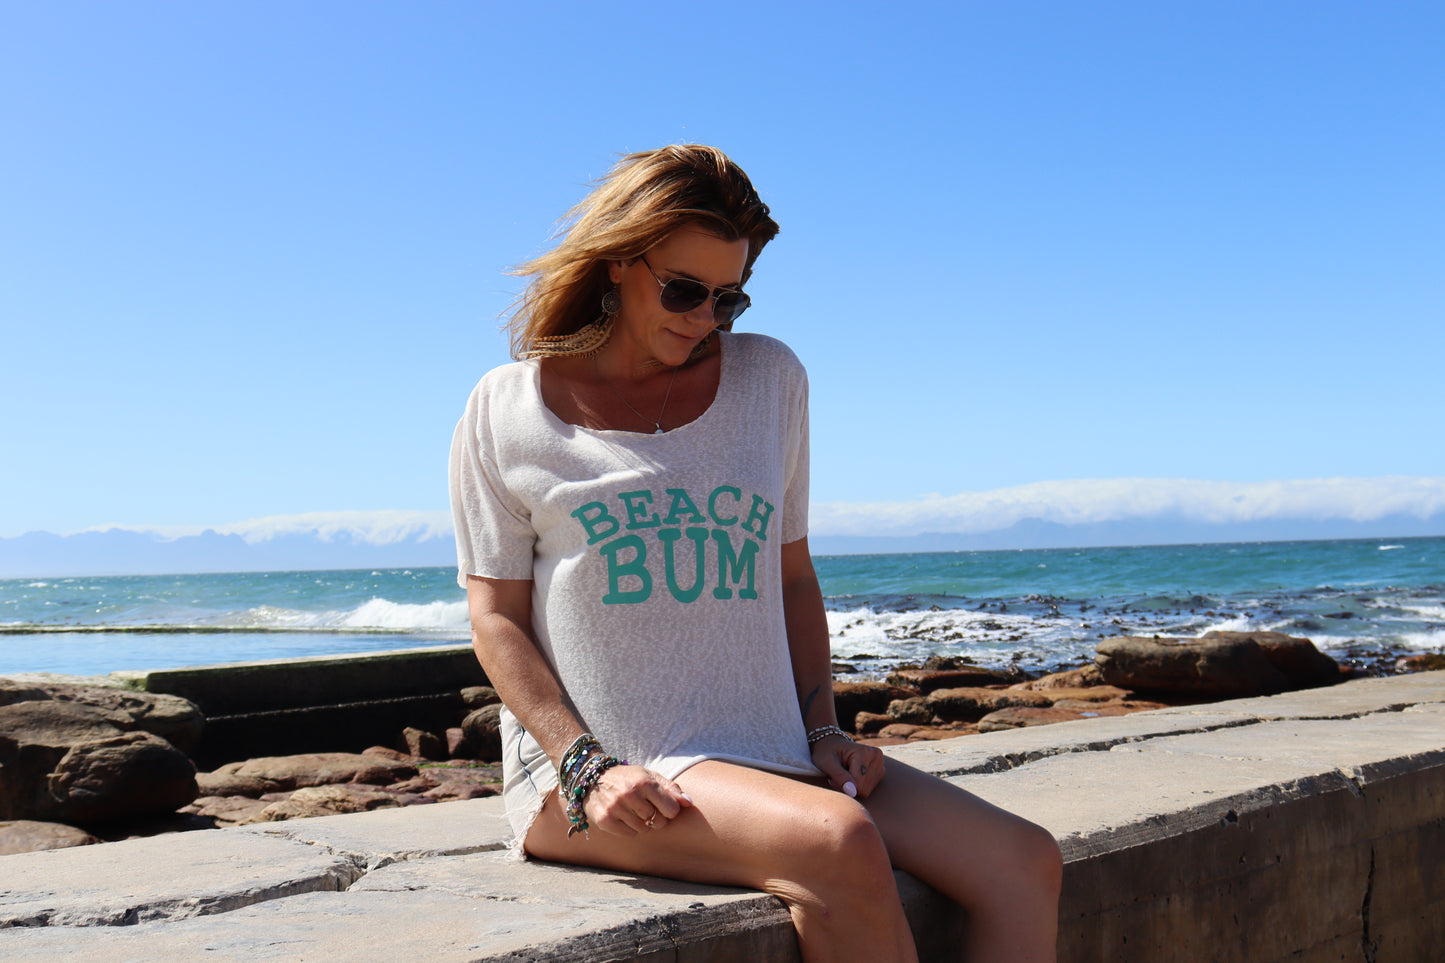 White beach bum with teal lettering